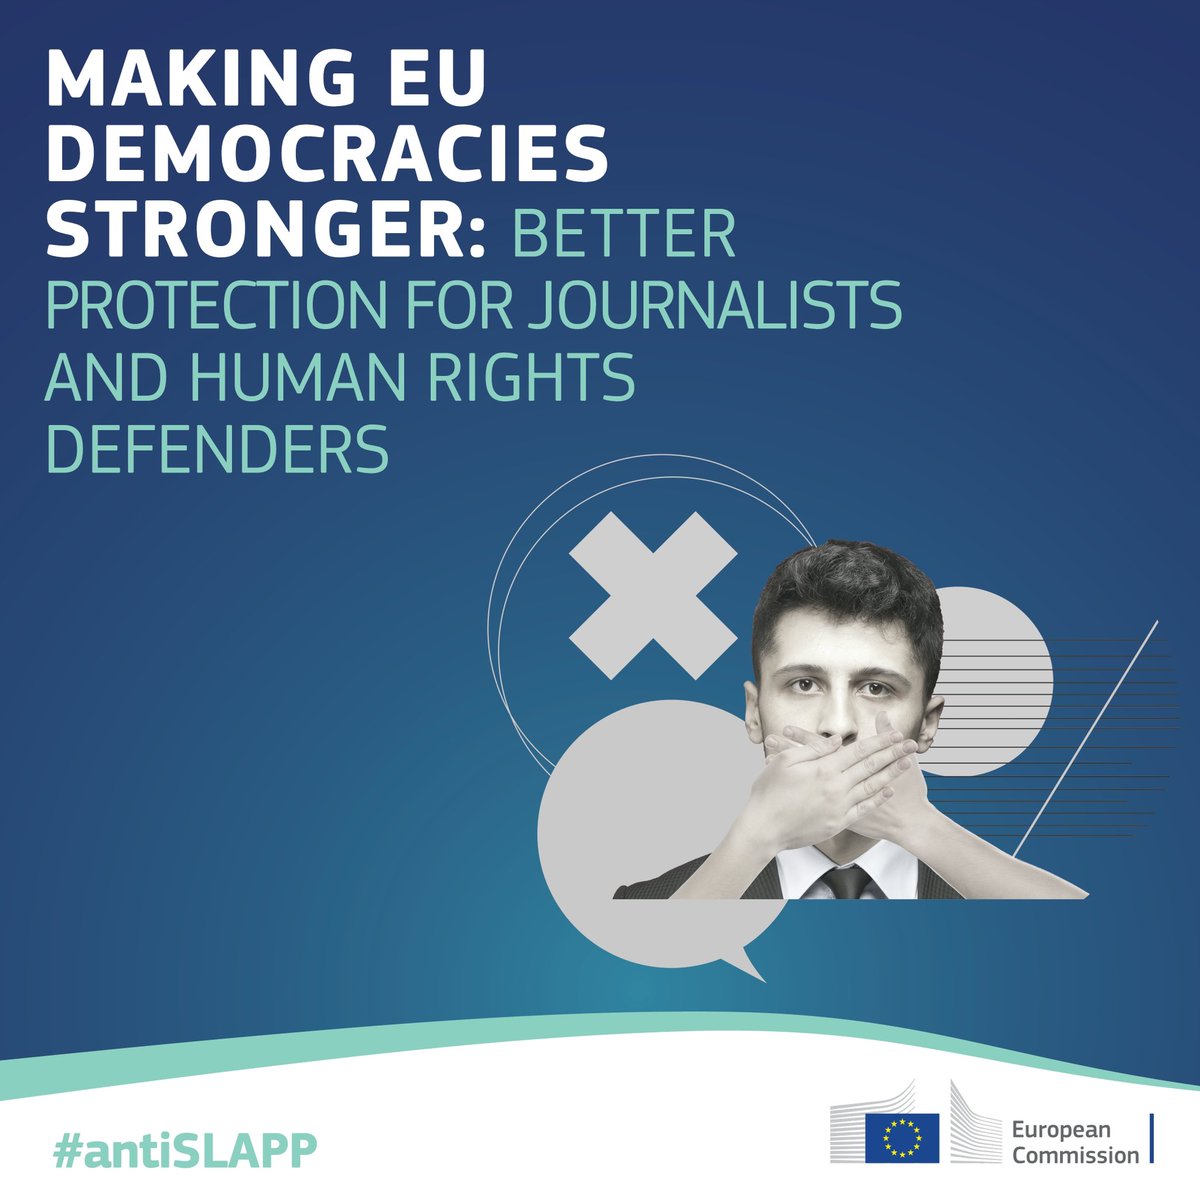 ‼️ The new Anti-#SLAPP rules enter into force today. 

They will protect critical voices and freedom of speech. 

Journalists & those acting in public interest should not be silenced, threatened or intimidated.

👉europa.eu/!mN3qKY

#StopSLAPPs #antiSLAPP